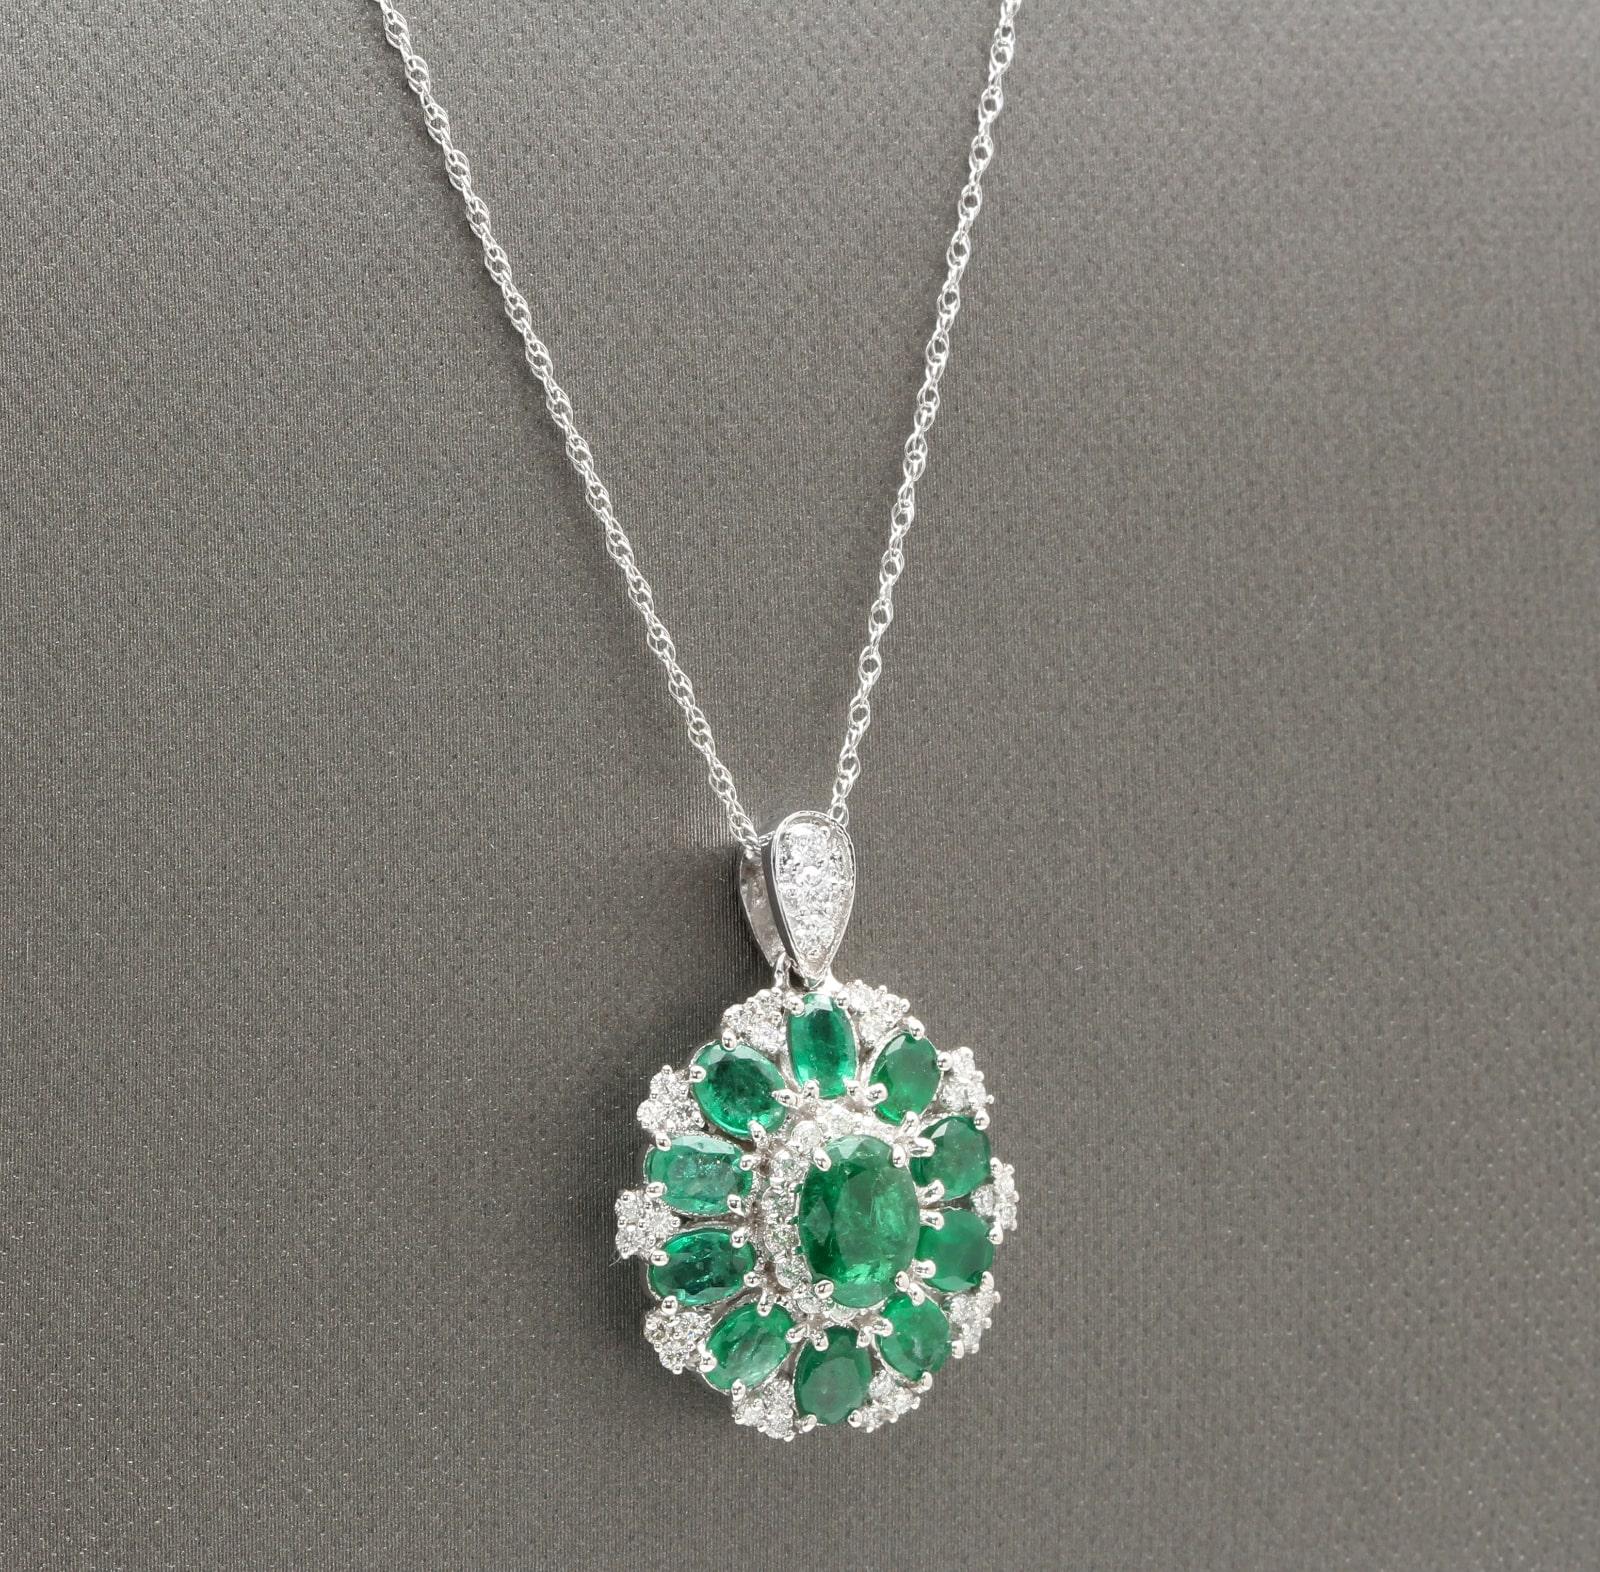 4.10Ct Natural Emerald and Diamond 14K Solid White Gold Necklace

Amazing looking piece! 

Stamped: 14K

Suggested Replacement Value: $6,000.00 

Total Natural Emeralds Weight is: Approx. 3.60 Carats

Center Emerald Measures: Approx. 8.00 x 6.00mm